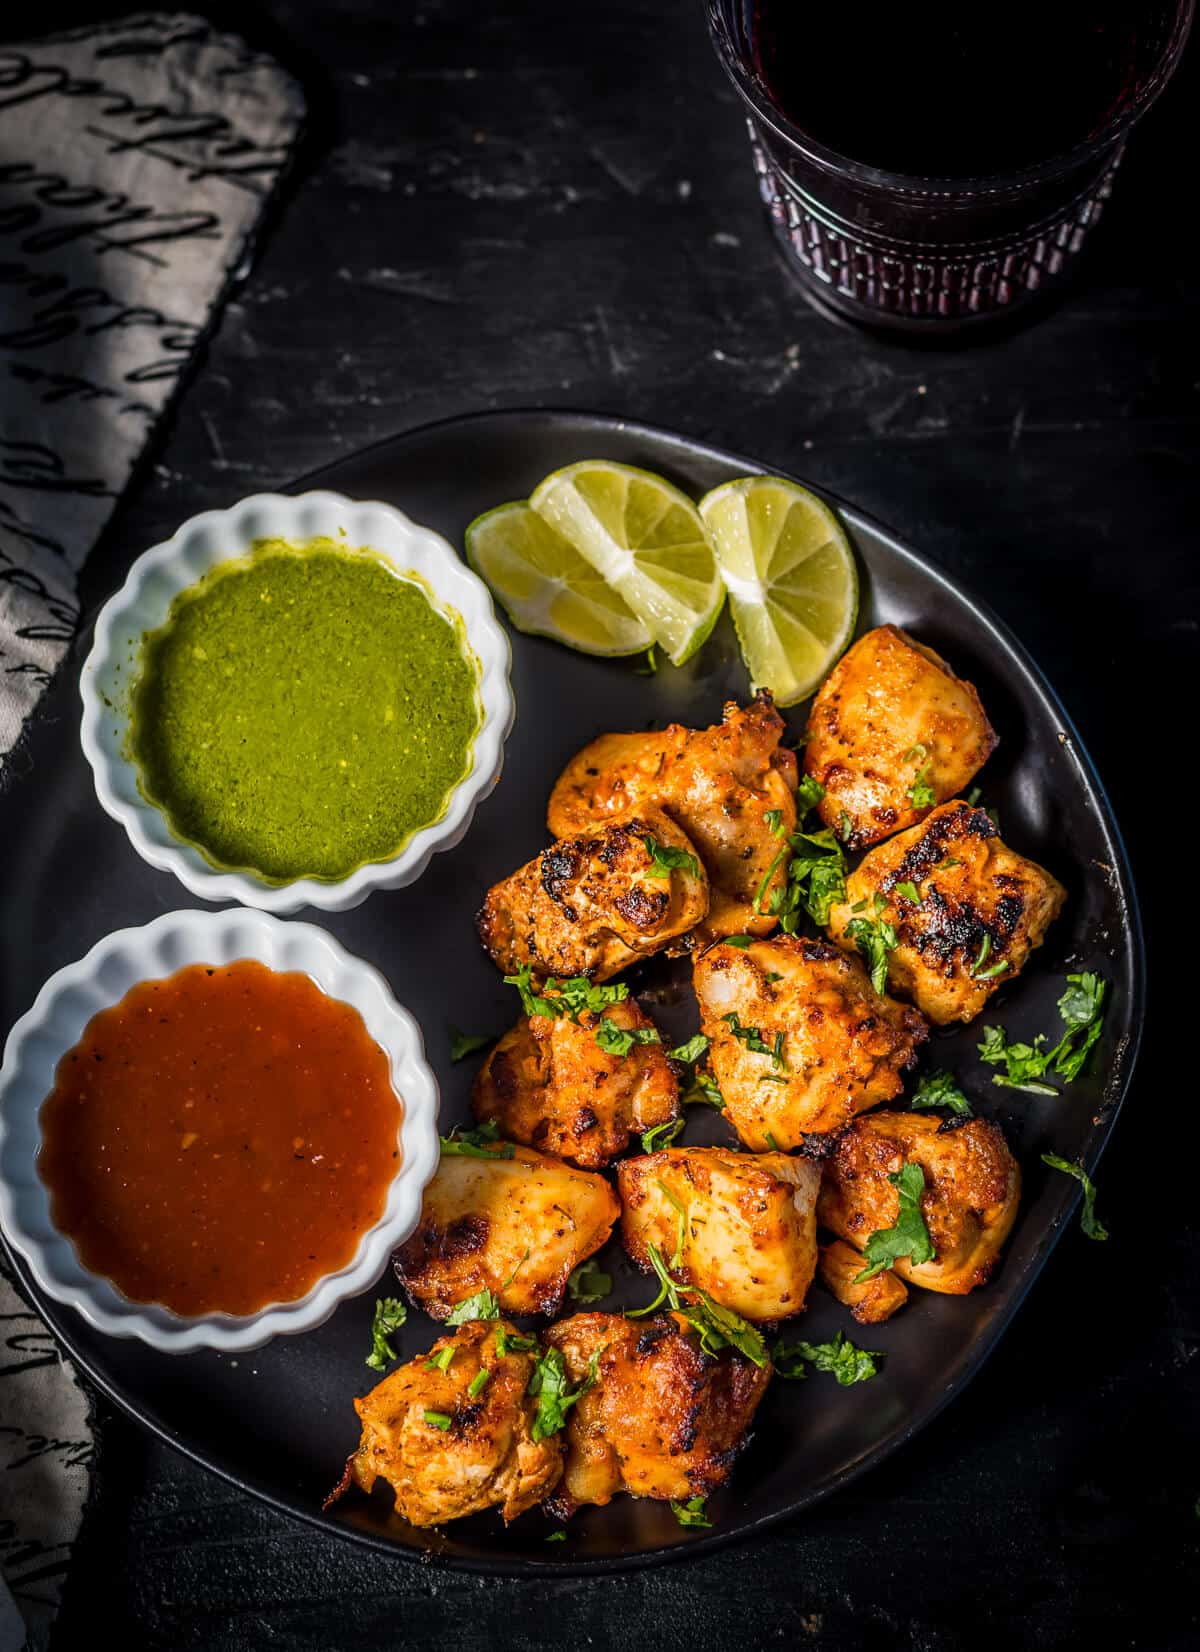 Chicken tikka served with green chutney and tamarind chutney along with lemon wedges